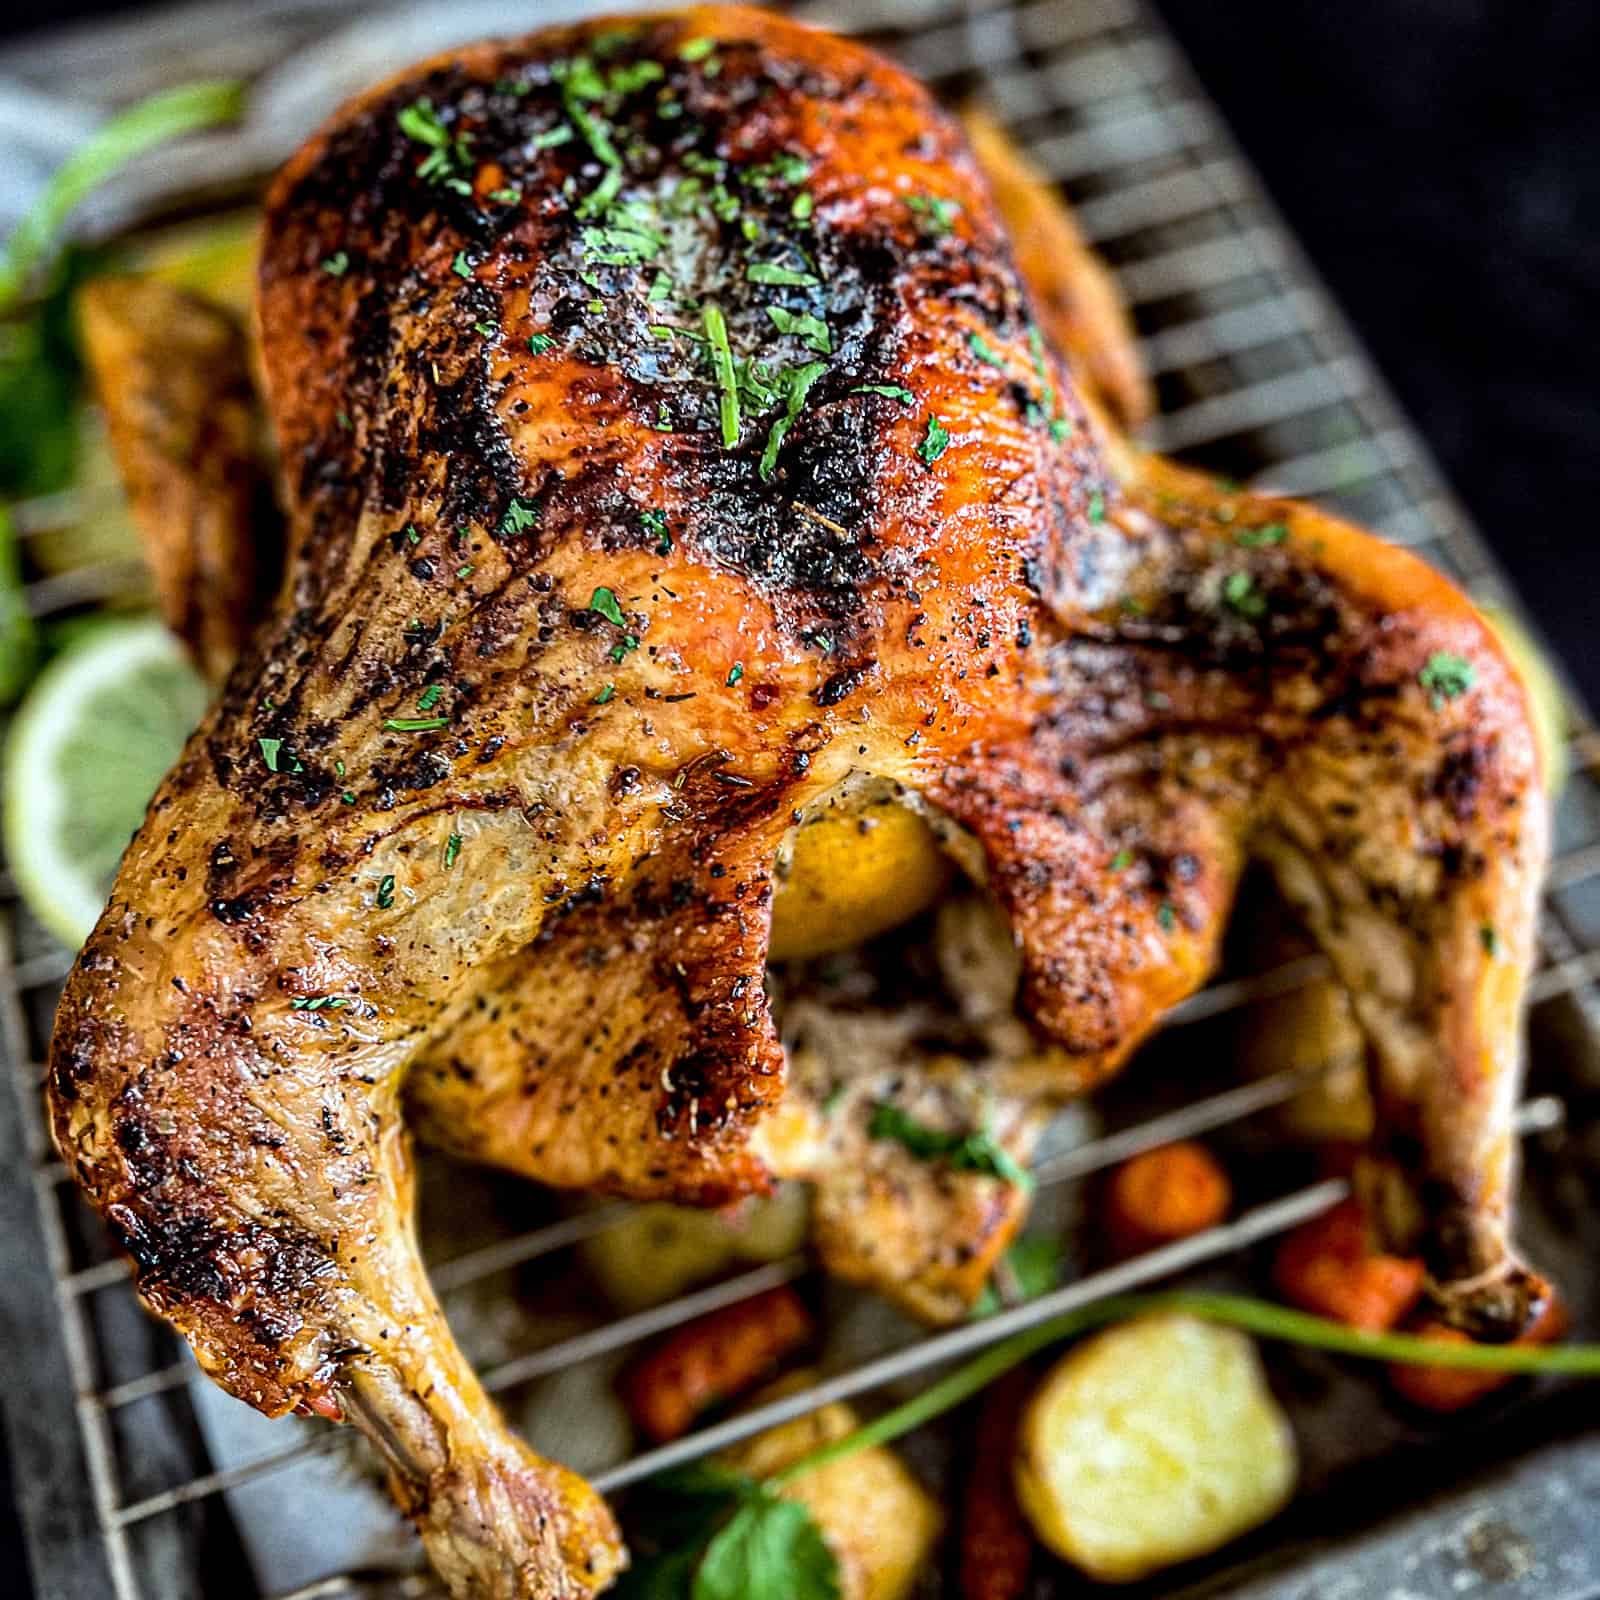 Roasted Chicken In Oven With Potatoes and Vegetables Recipe